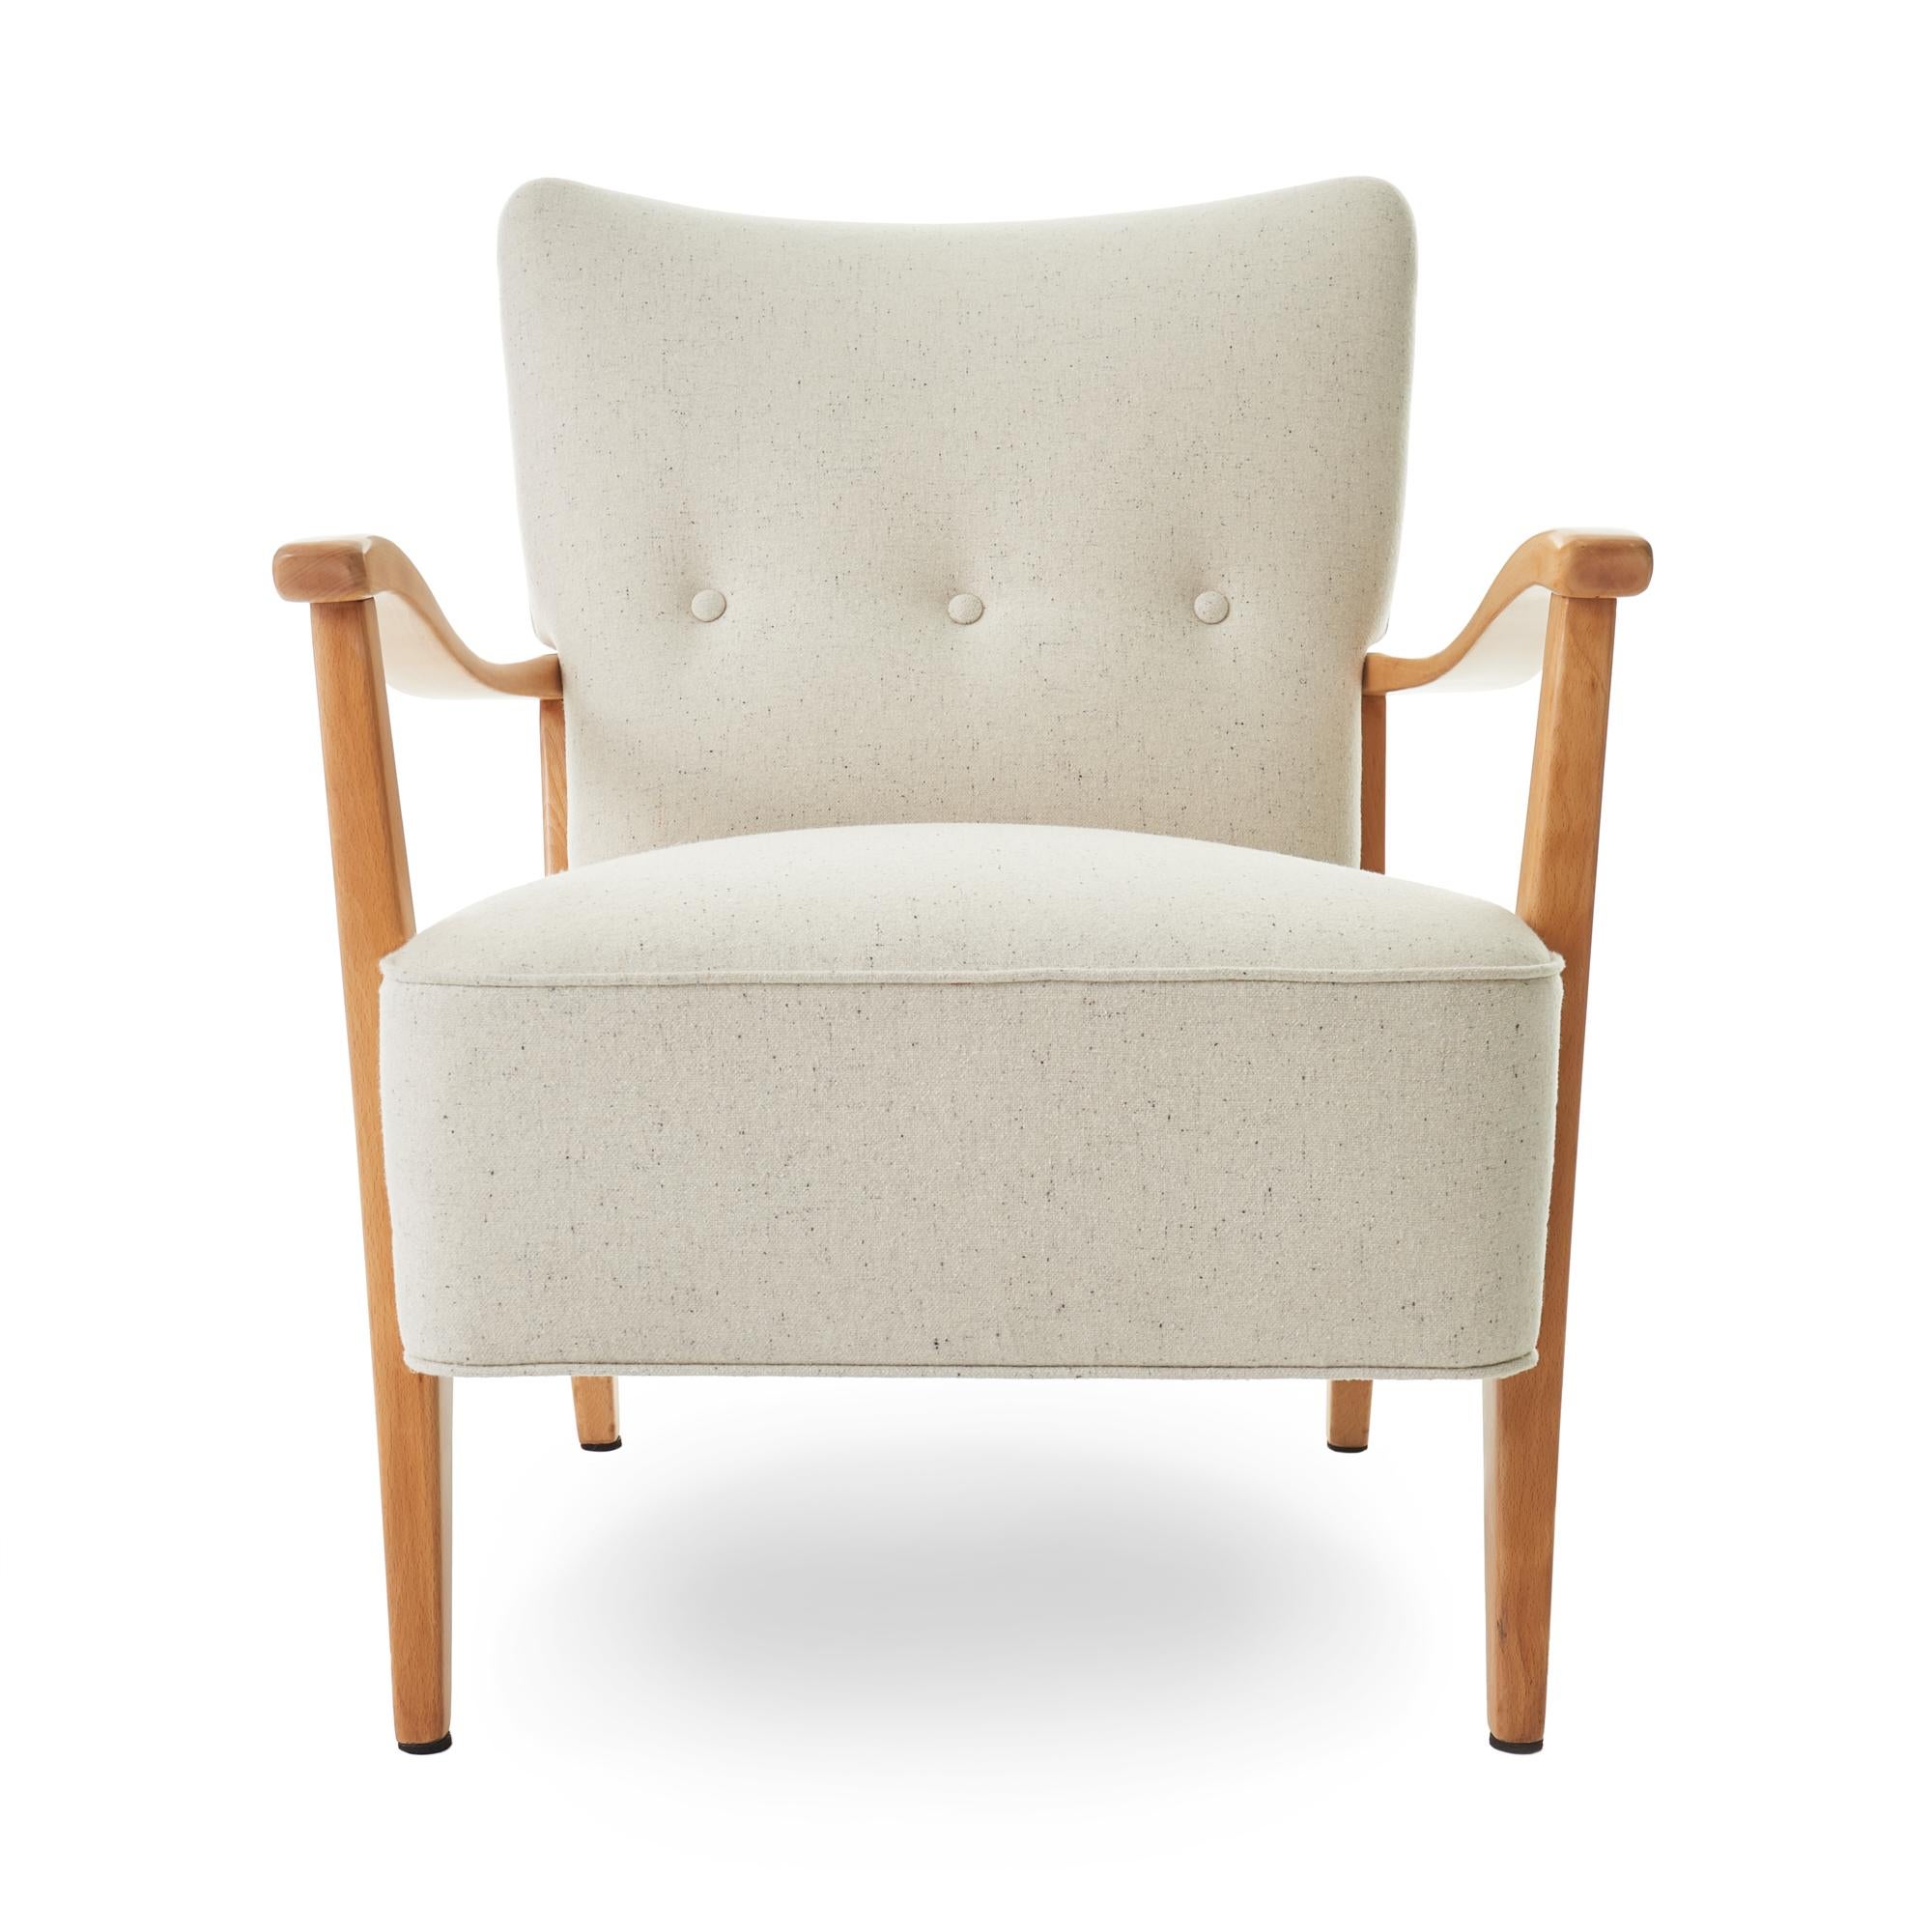 Lovely c1953 Folke Ohlsson for AP Madsen' ‘Modern’ armchair. Originally manufactured in Vancouver, Canada. Newly refinished beech wood frame, and reupholstered in Pollack’s Lana E Seta wool in ‘Cocoon’. This chair is in perfect condition and ready